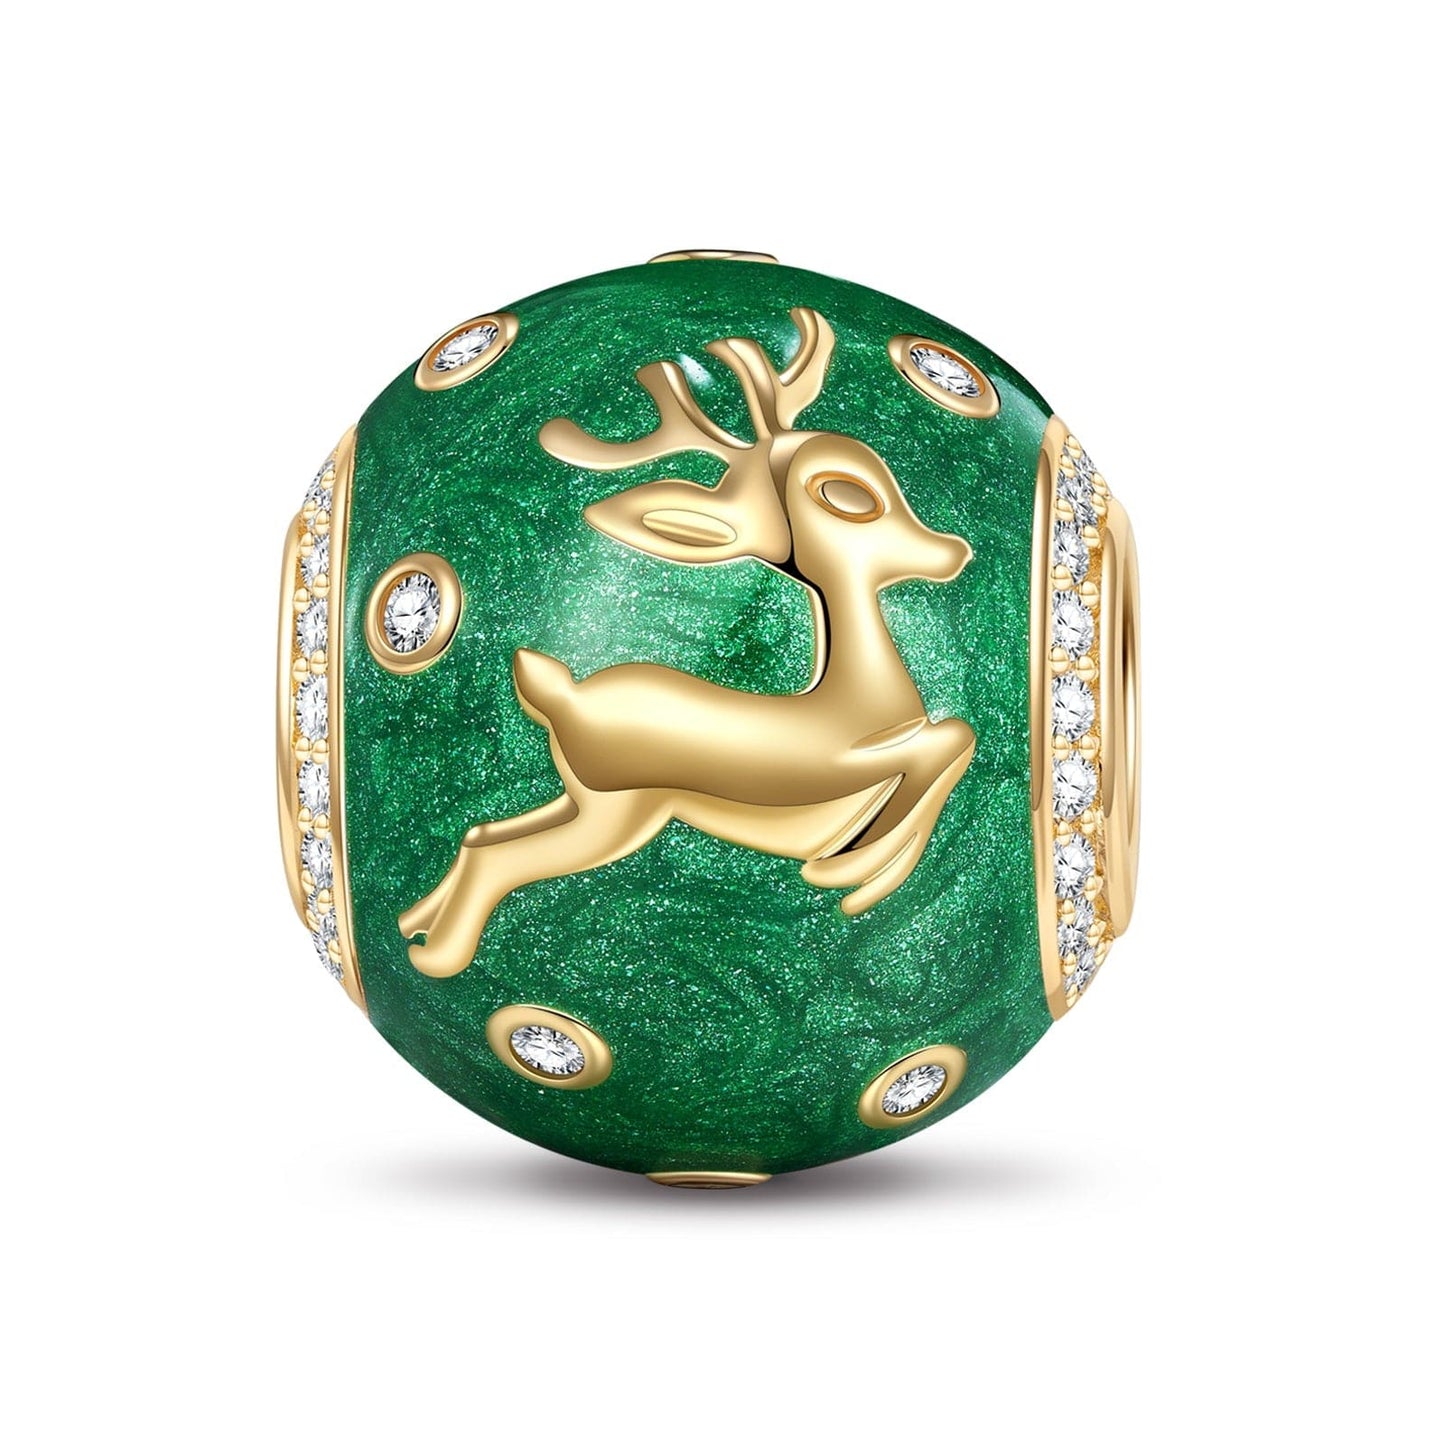 Reindeer Christmas Eve Green Tarnish-resistant Silver Charms With Enamel In 14K Gold Plated